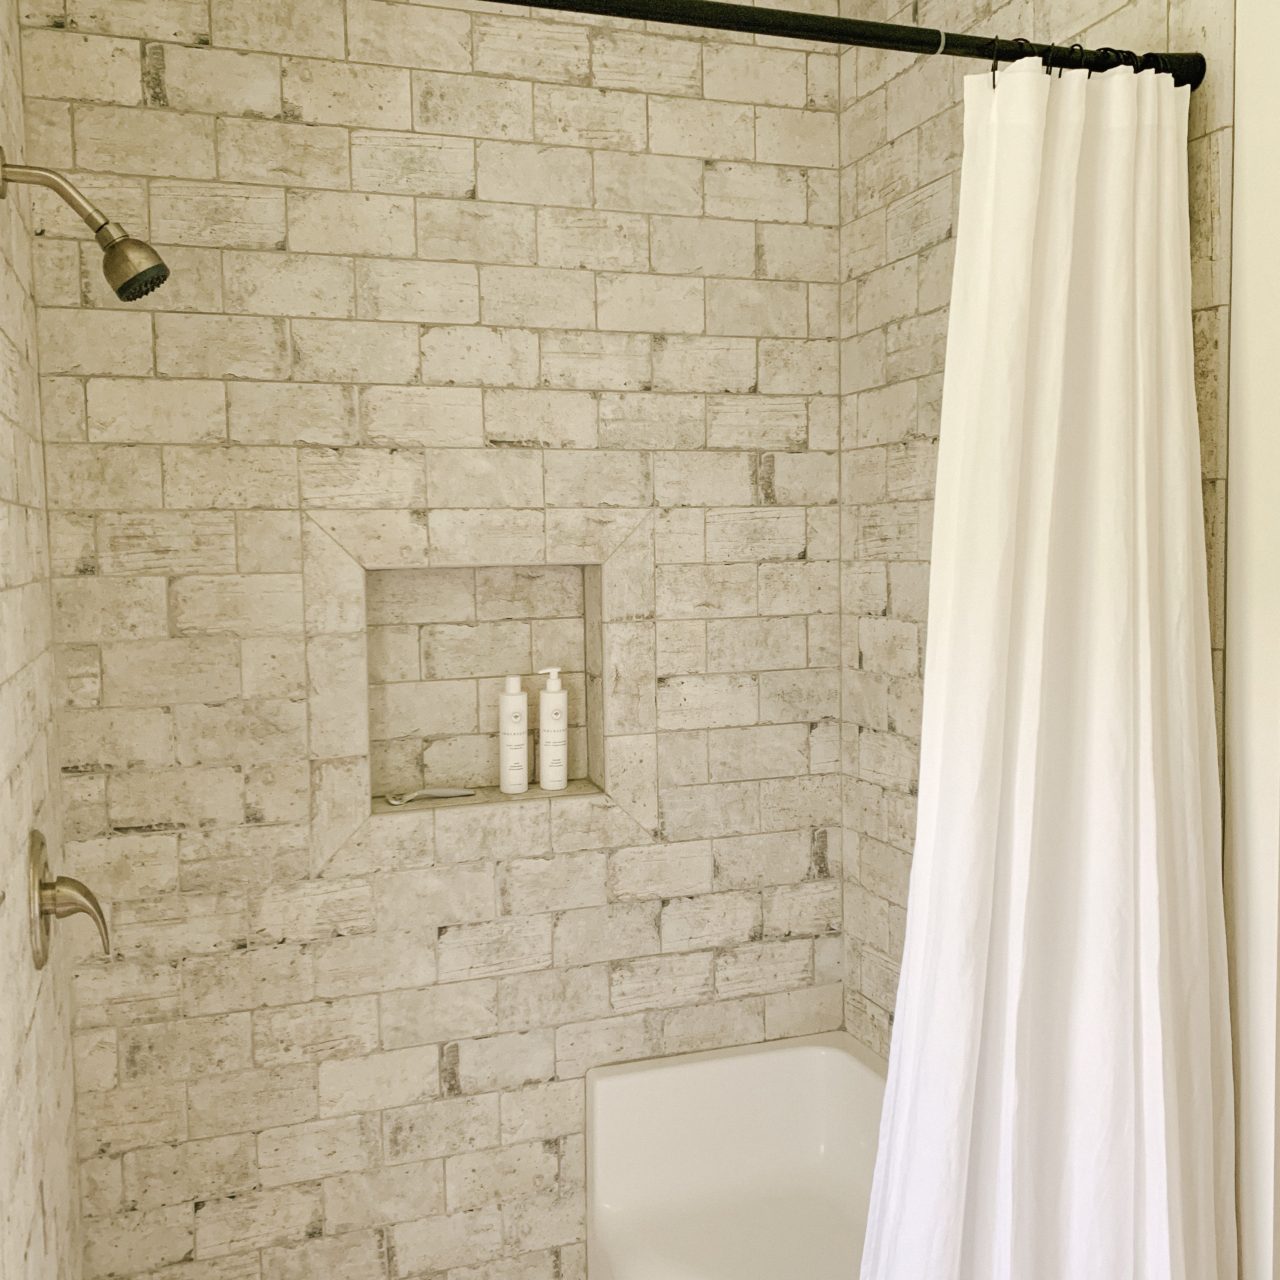 Shower Door Alternative – Why We Like a Curtain Better